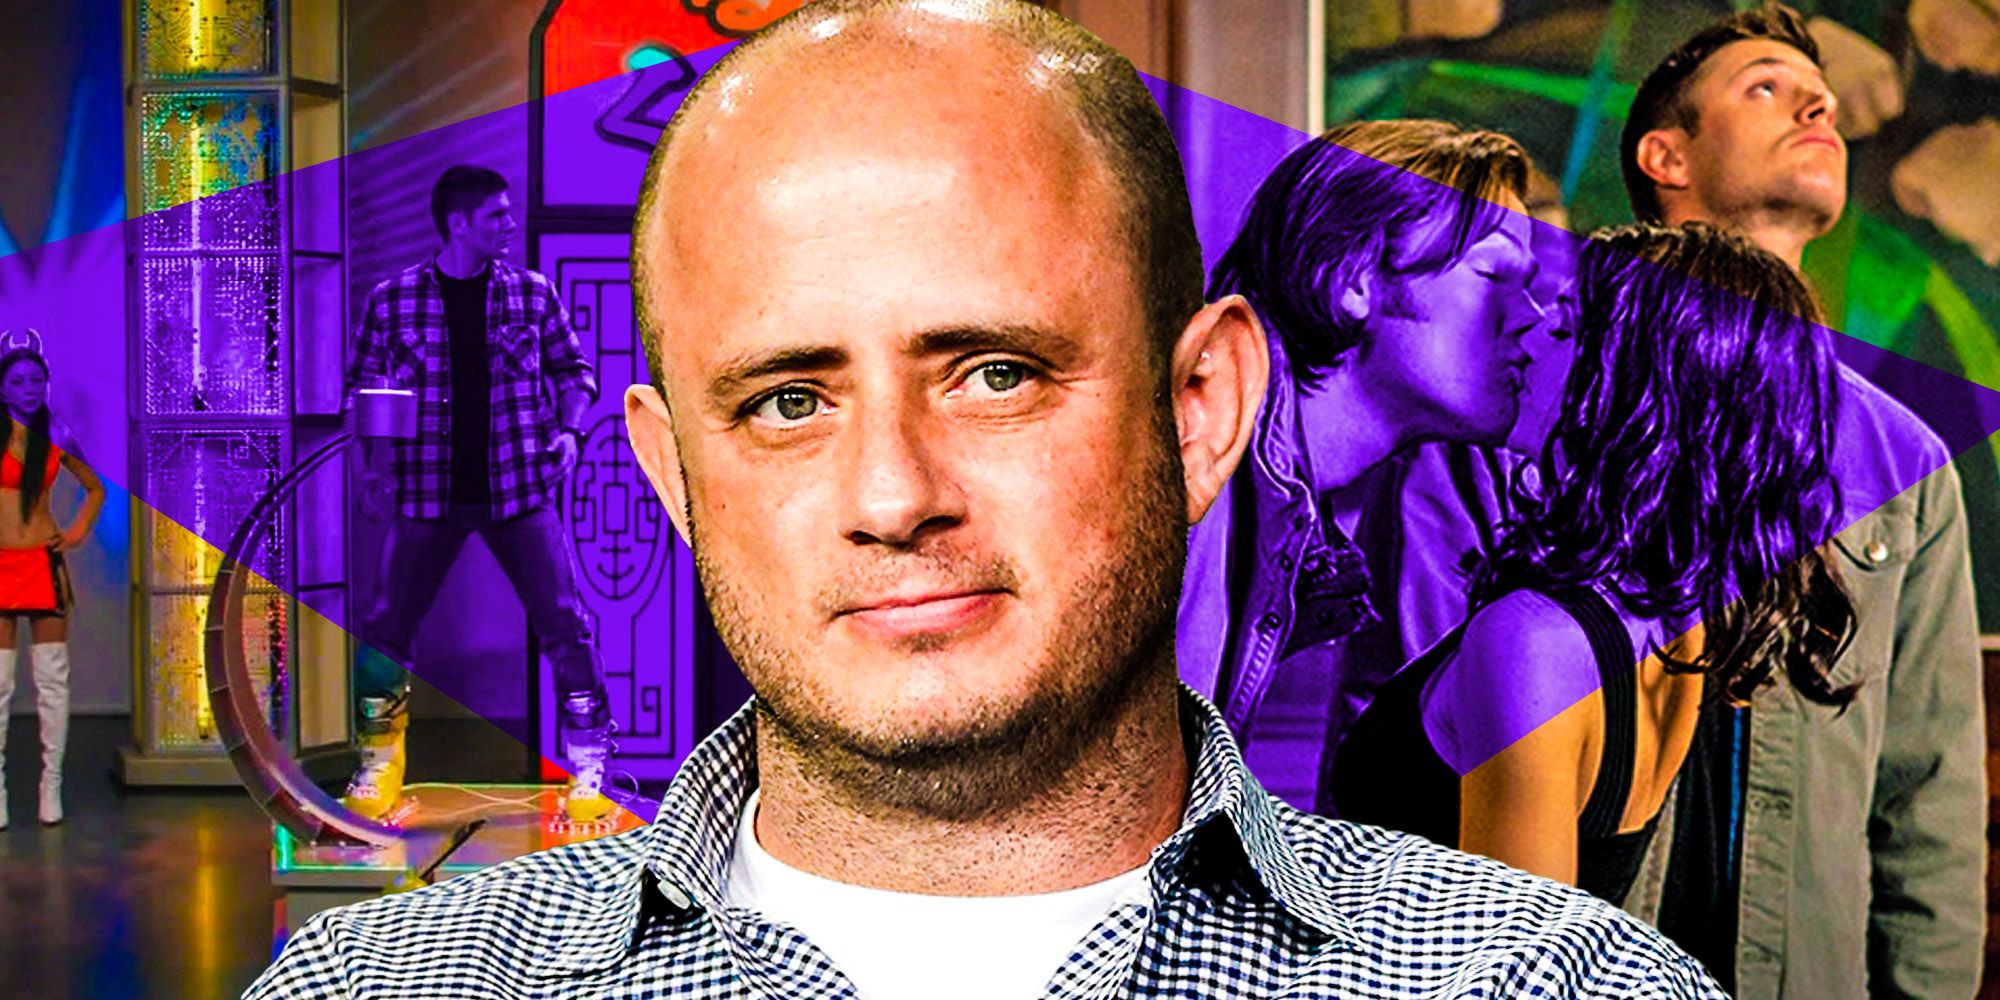 Eric Kripke Supernatural favorite episodes the french connection changing channels